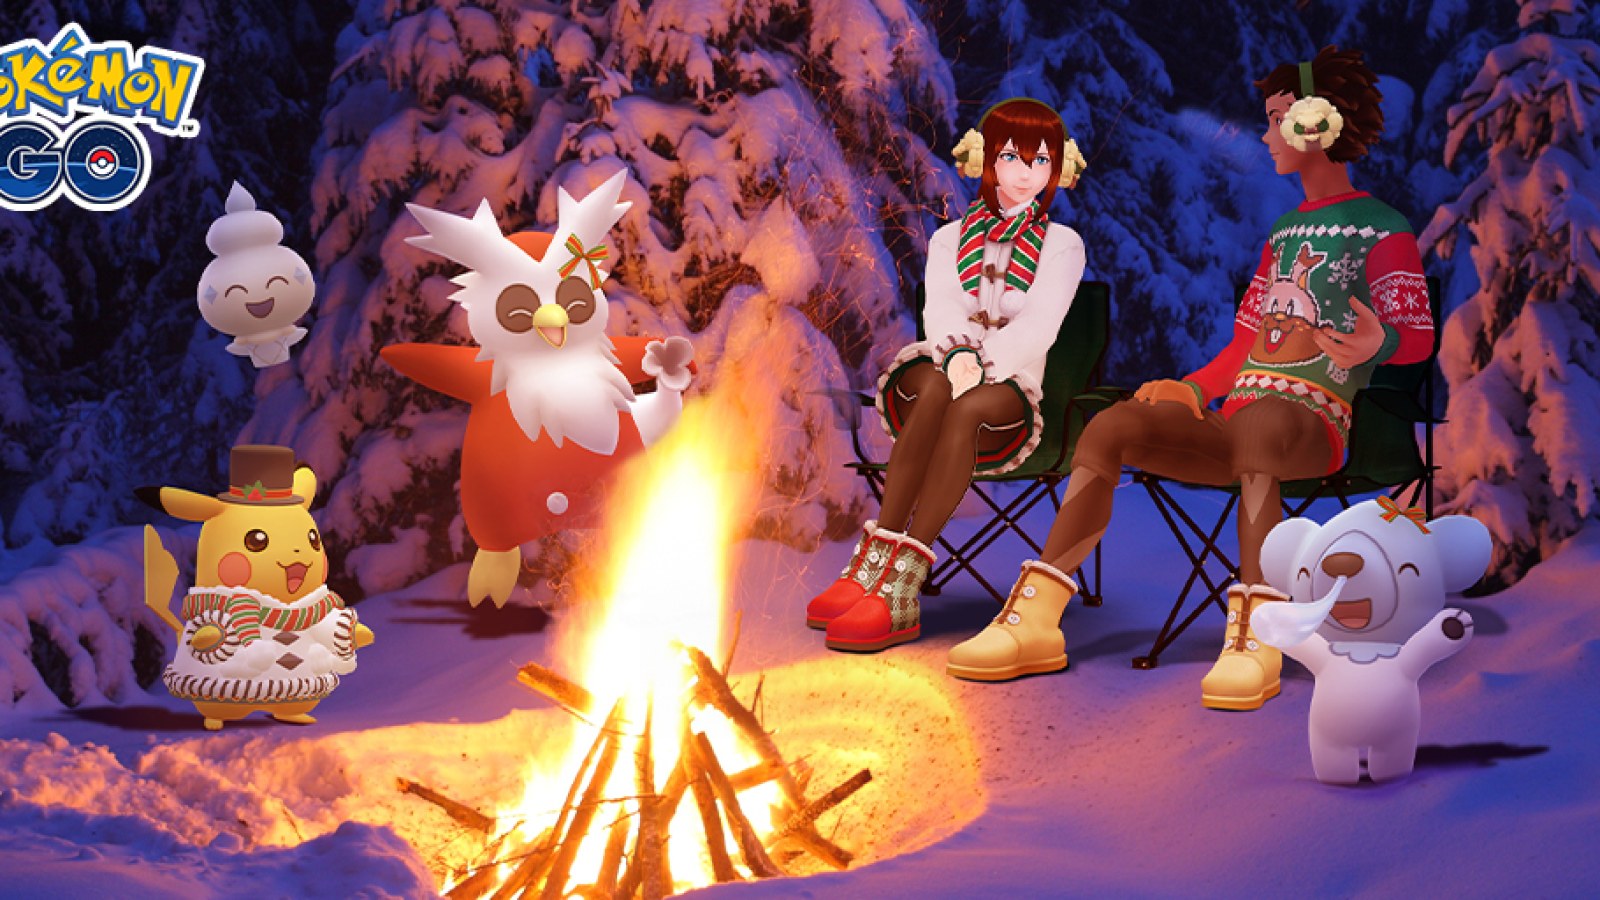 Pokémon GO on X: A cold front is sweeping in—the Catch Mastery event is  coming soon! Show off your catching skills on December 9 while walking in a  winter wonderland with Ice-type